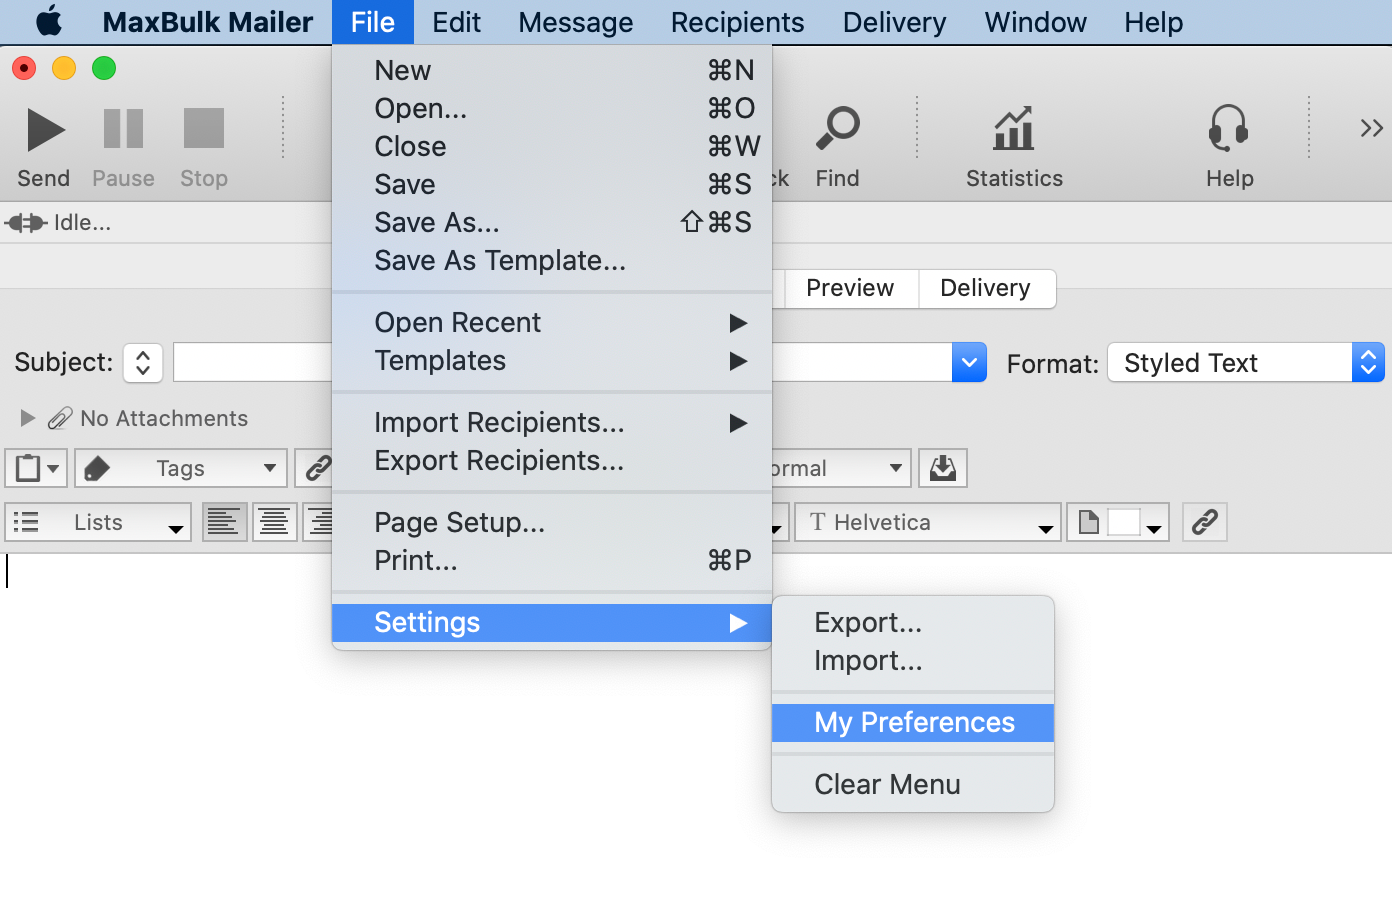 Importing your settings